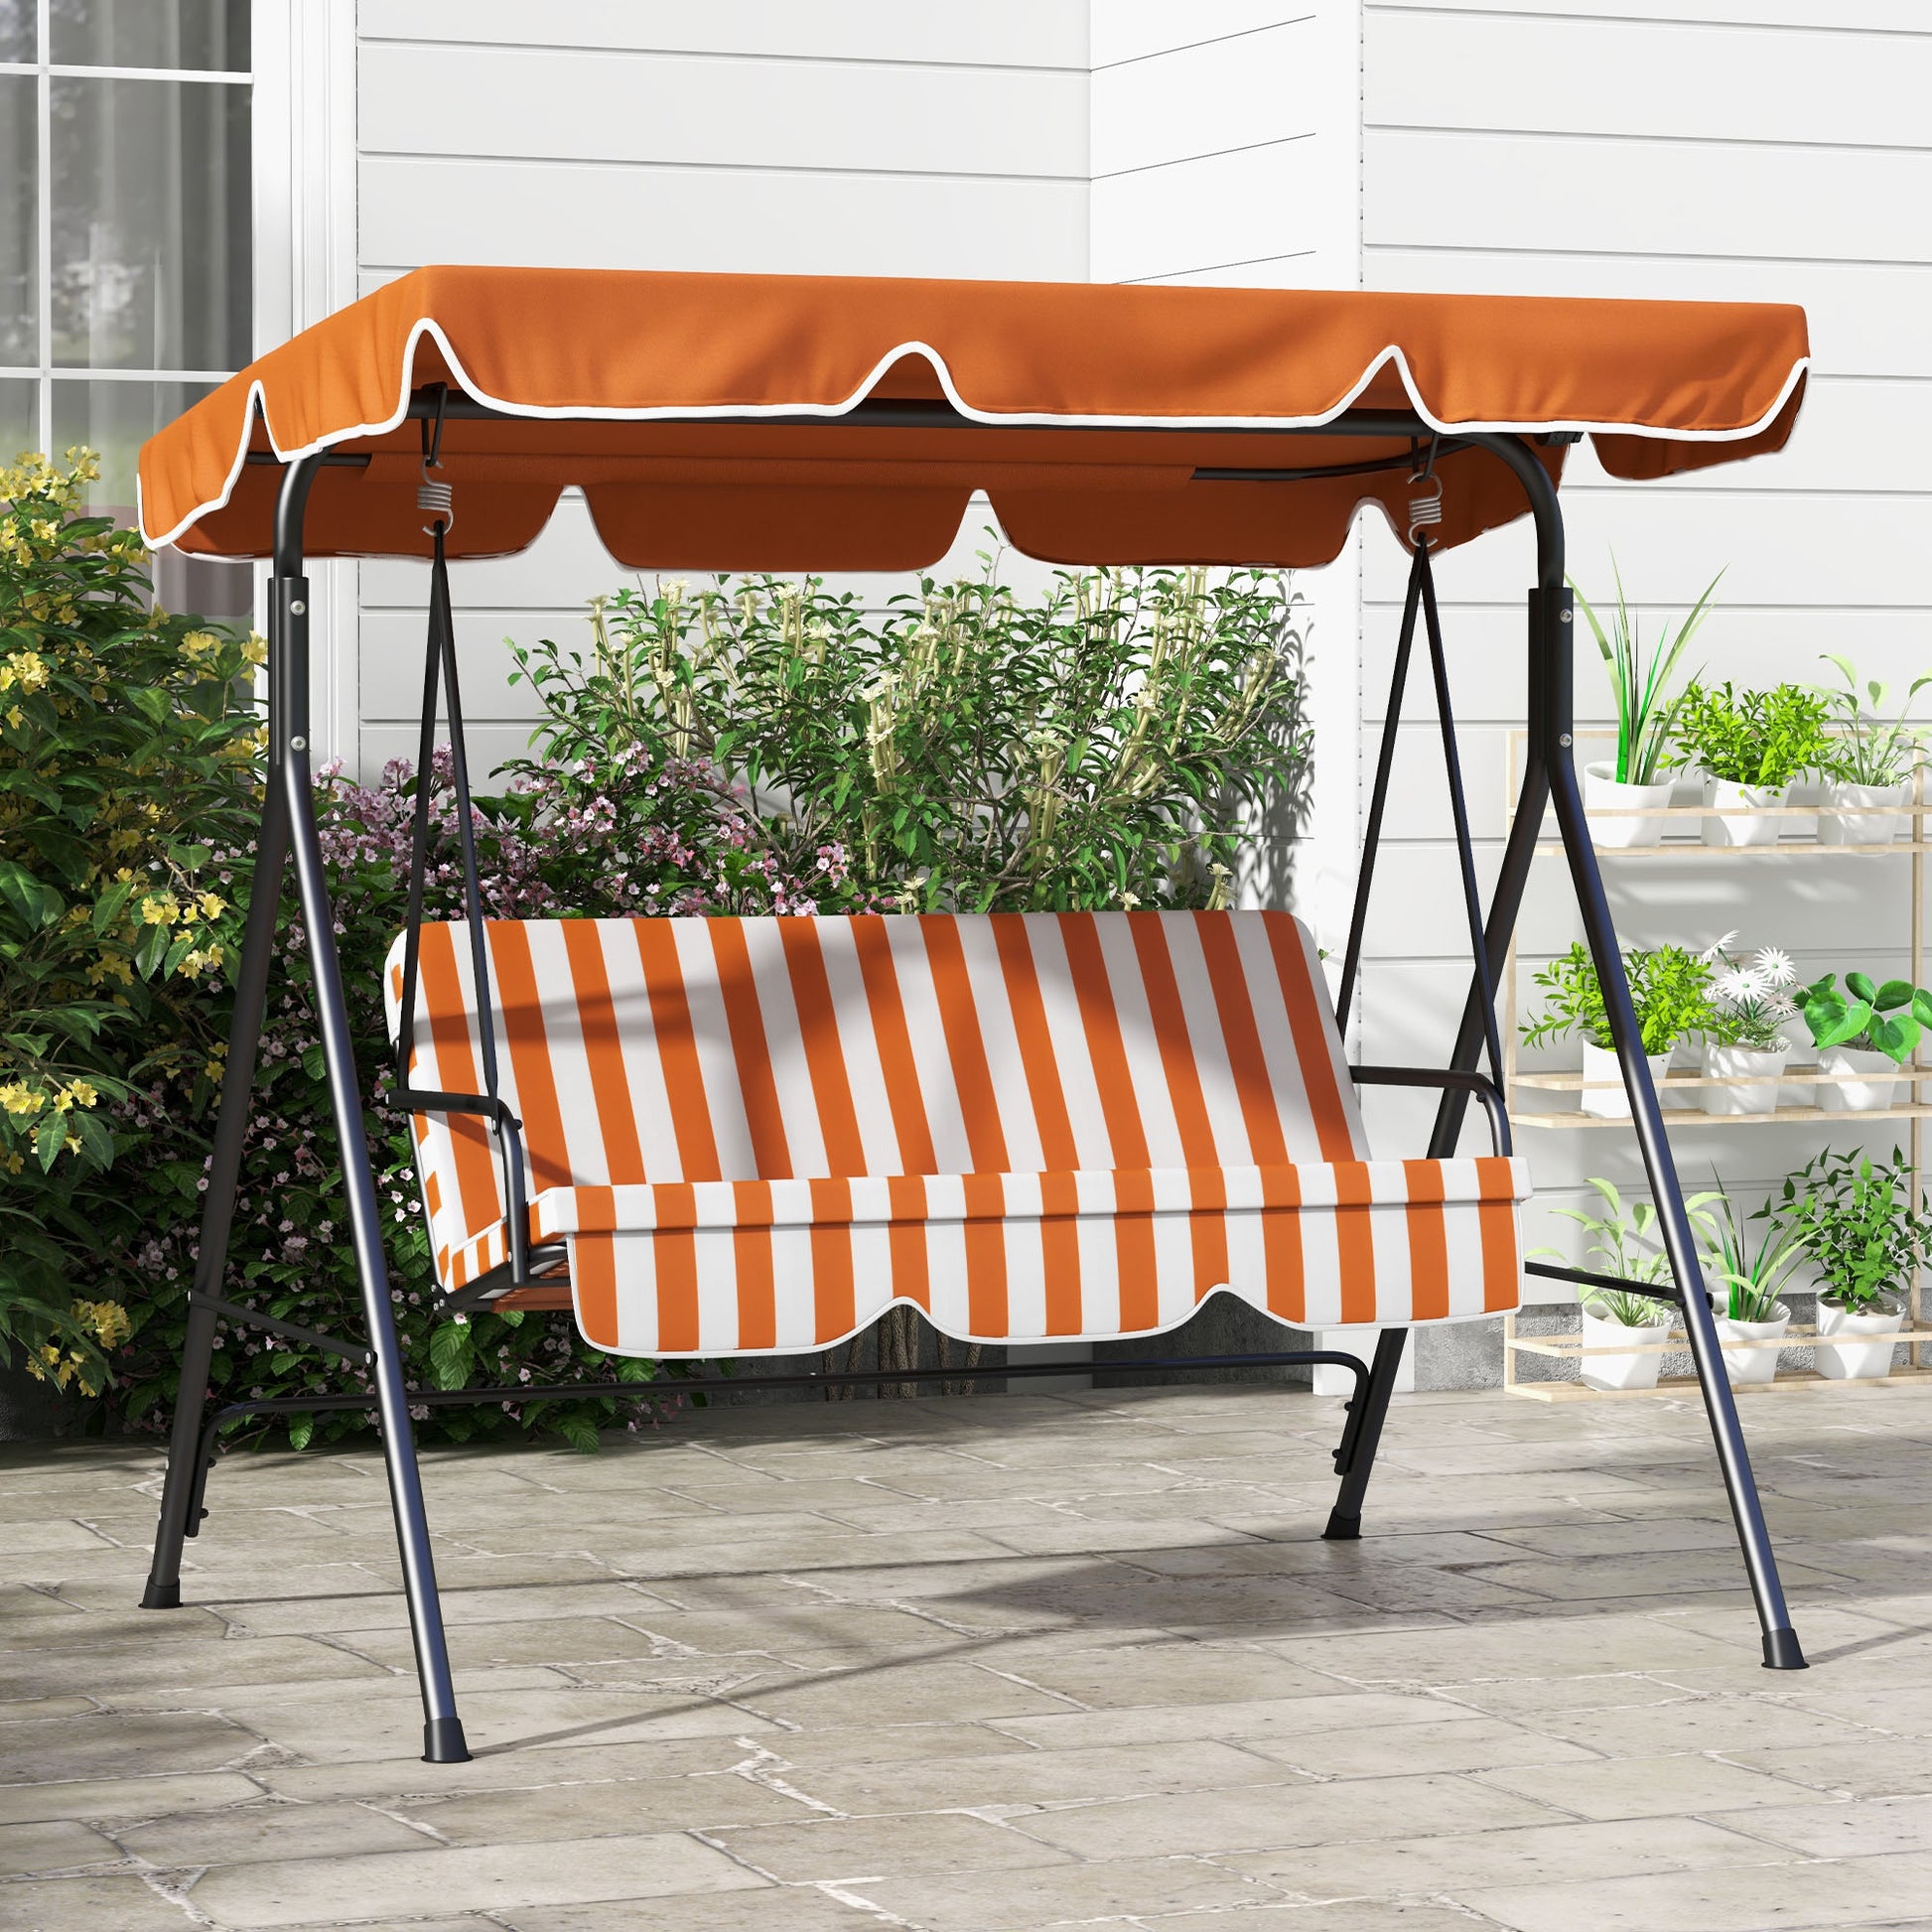 3-Seater Outdoor Porch Swing with Adjustable Canopy, Patio Swing Chair for Garden, Poolside, Backyard, Orange at Gallery Canada